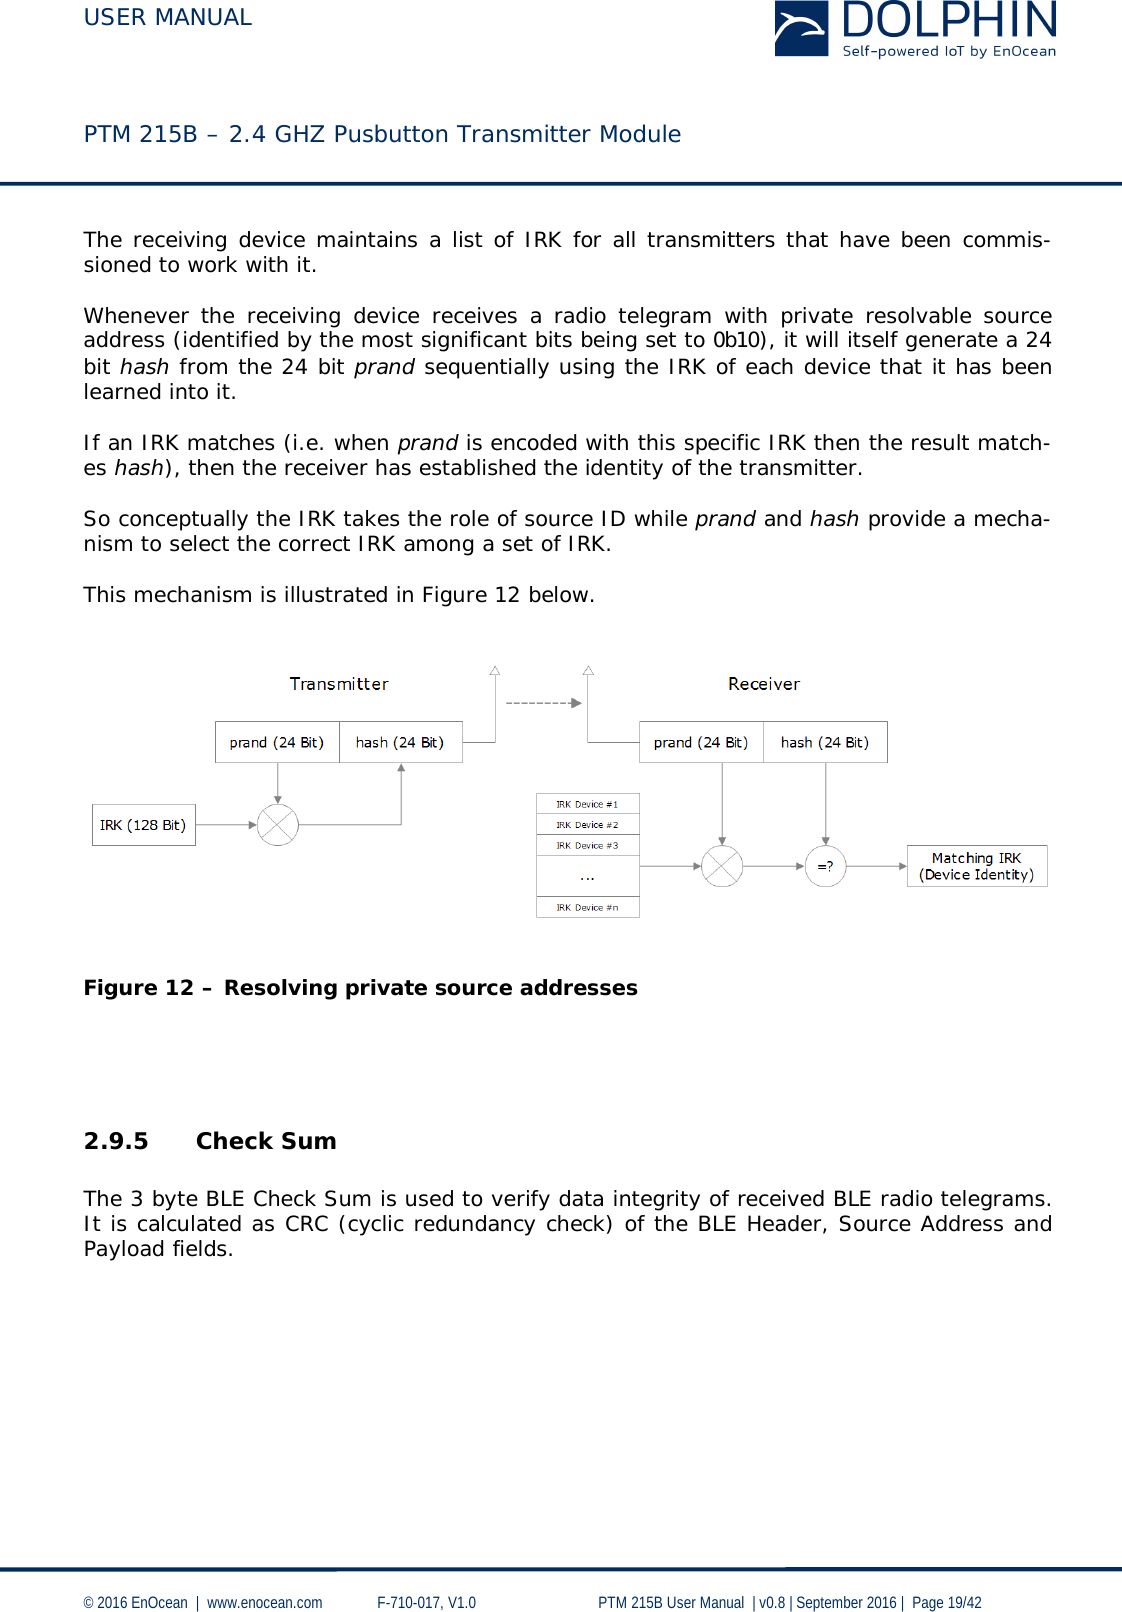  USER MANUAL    PTM 215B – 2.4 GHZ Pusbutton Transmitter Module  © 2016 EnOcean  |  www.enocean.com   F-710-017, V1.0        PTM 215B User Manual  | v0.8 | September 2016 |  Page 19/42  The receiving device maintains a list of IRK for all transmitters that have been commis-sioned to work with it.   Whenever the receiving device receives a radio telegram with private resolvable source address (identified by the most significant bits being set to 0b10), it will itself generate a 24 bit hash from the 24 bit prand sequentially using the IRK of each device that it has been learned into it.  If an IRK matches (i.e. when prand is encoded with this specific IRK then the result match-es hash), then the receiver has established the identity of the transmitter.  So conceptually the IRK takes the role of source ID while prand and hash provide a mecha-nism to select the correct IRK among a set of IRK.   This mechanism is illustrated in Figure 12 below.      Figure 12 – Resolving private source addresses     2.9.5 Check Sum  The 3 byte BLE Check Sum is used to verify data integrity of received BLE radio telegrams.  It is calculated as CRC (cyclic redundancy check) of the BLE Header, Source Address and Payload fields.     